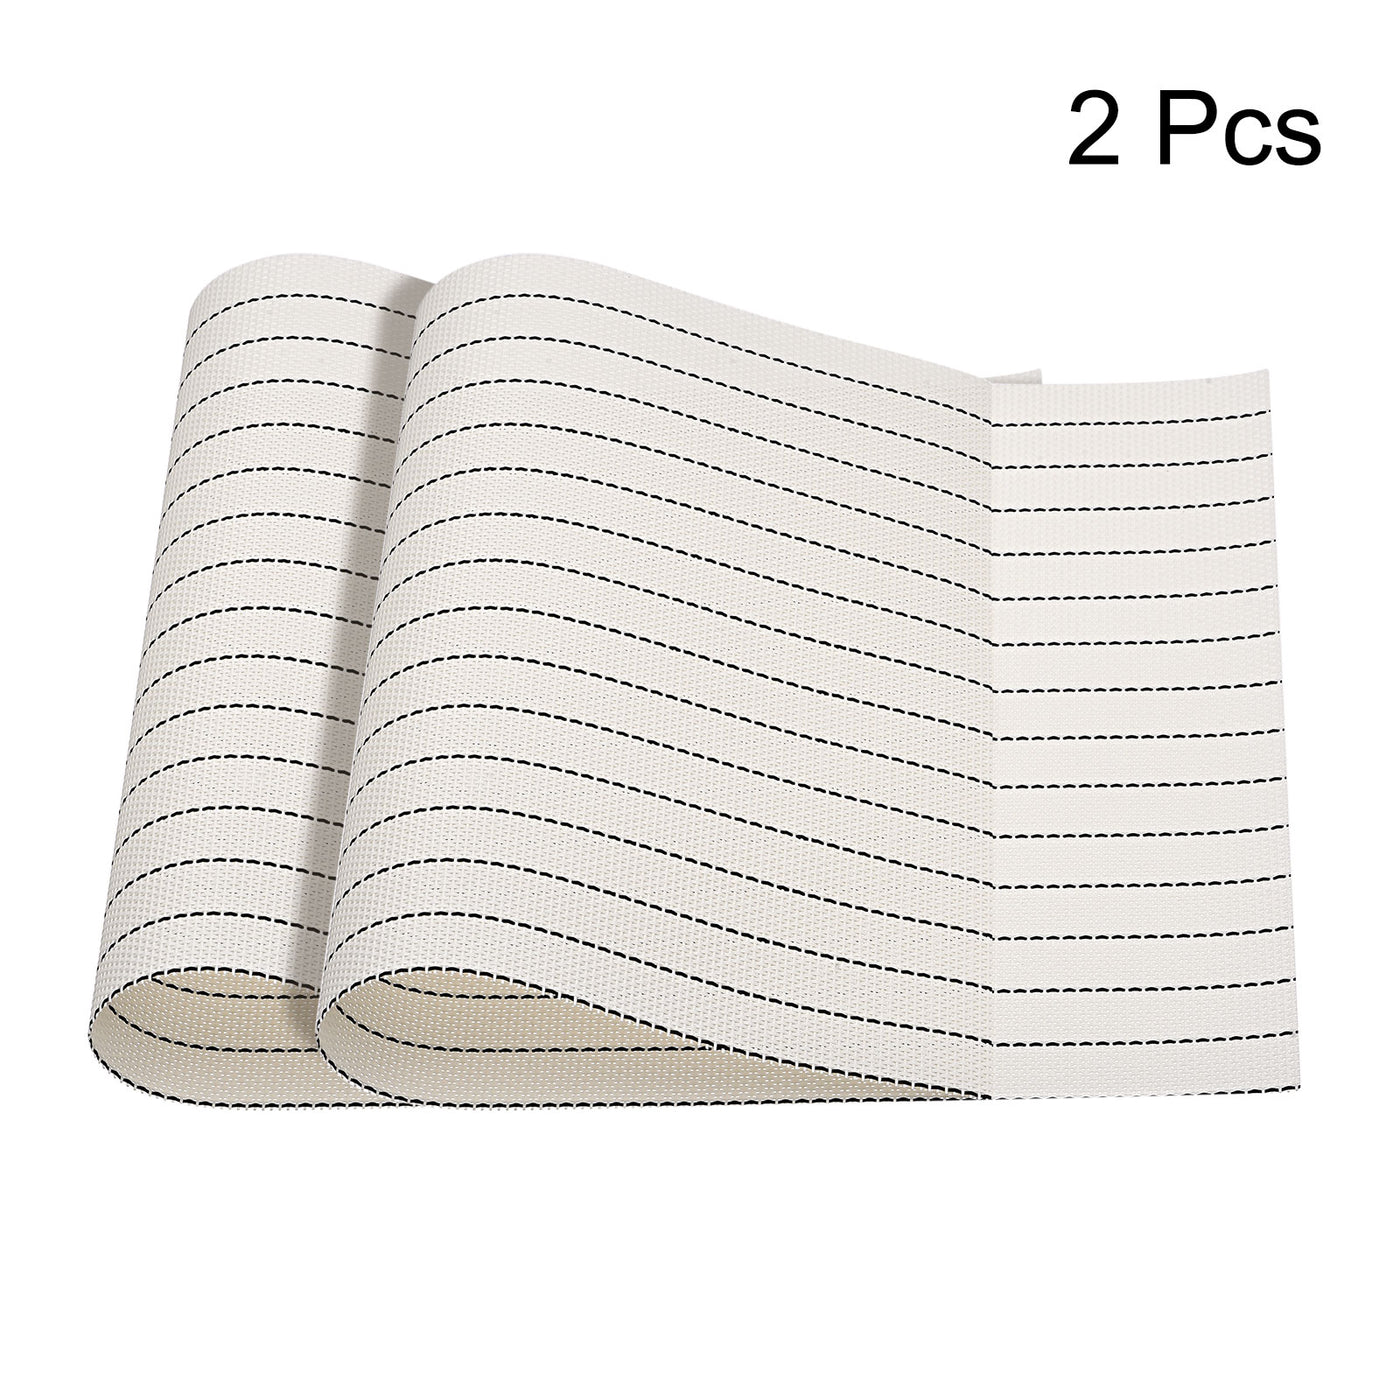 uxcell Uxcell Place Mats, 450x300mm Table Mats Set of 2 PVC Washable Woven Placemat White